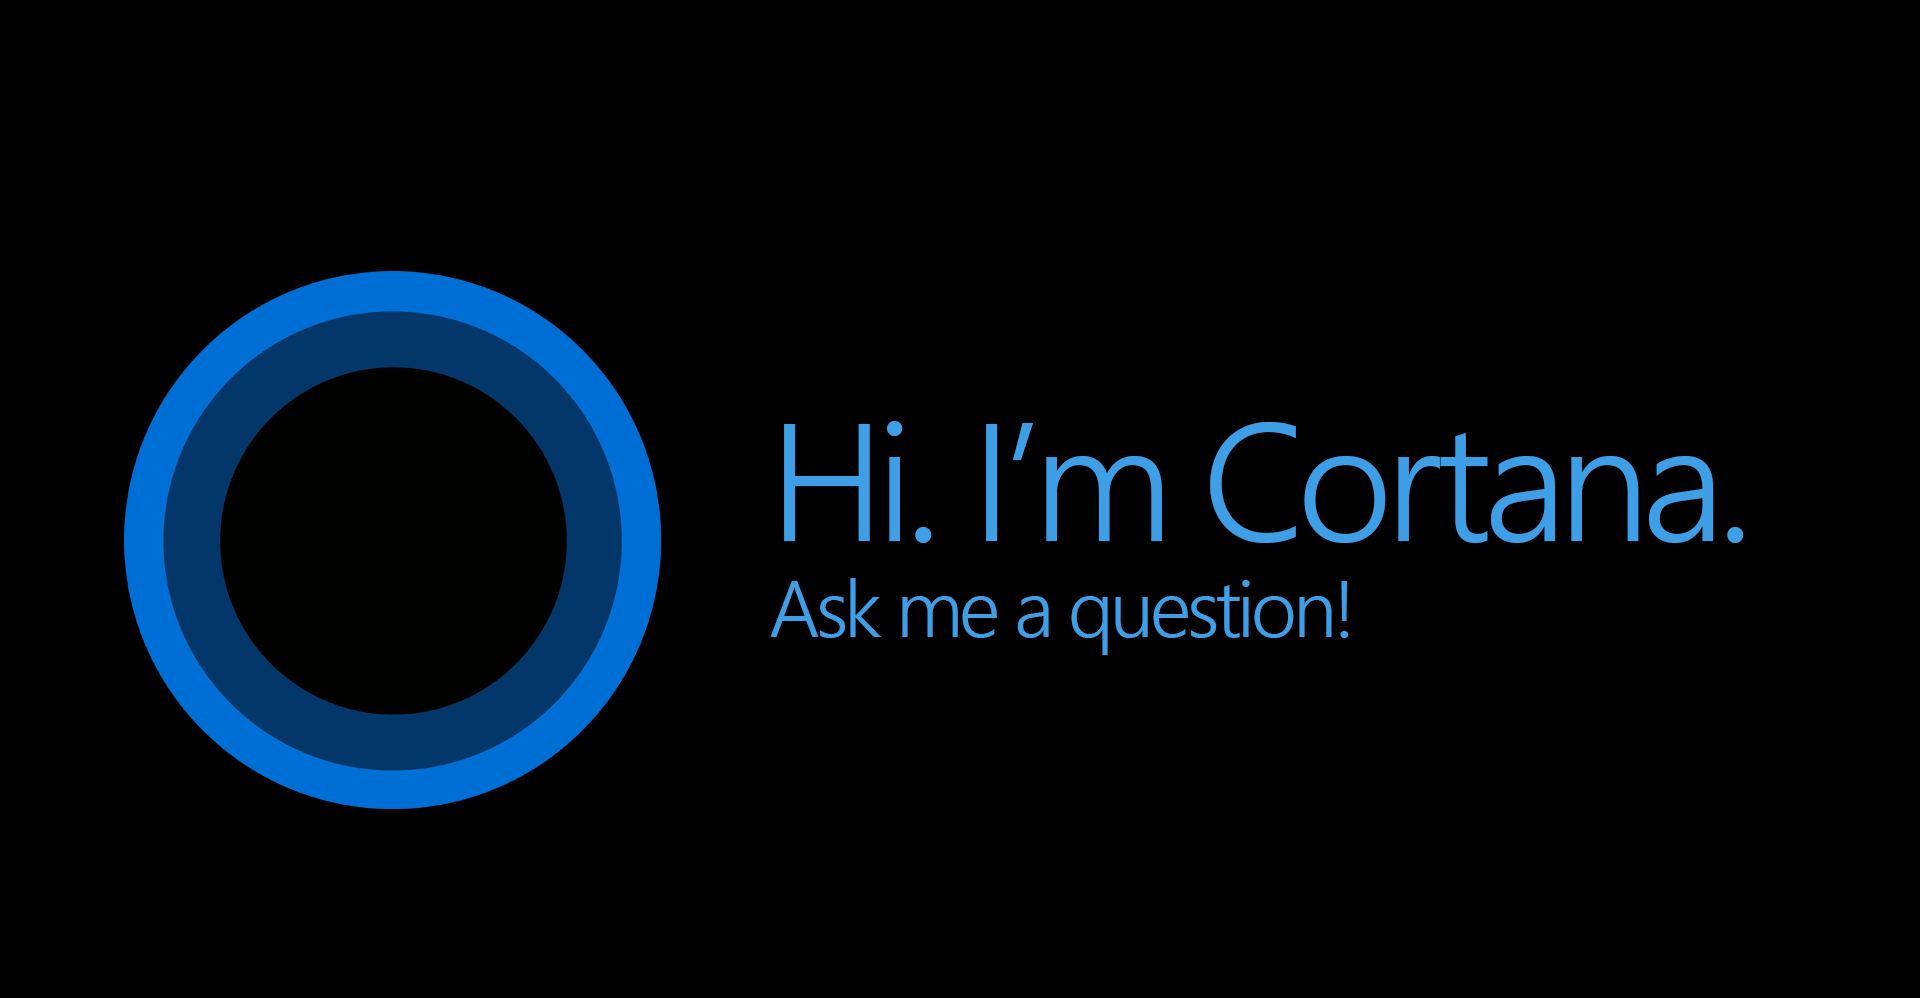 Cortana in Windows 10 to support only Bing and Edge for search operations